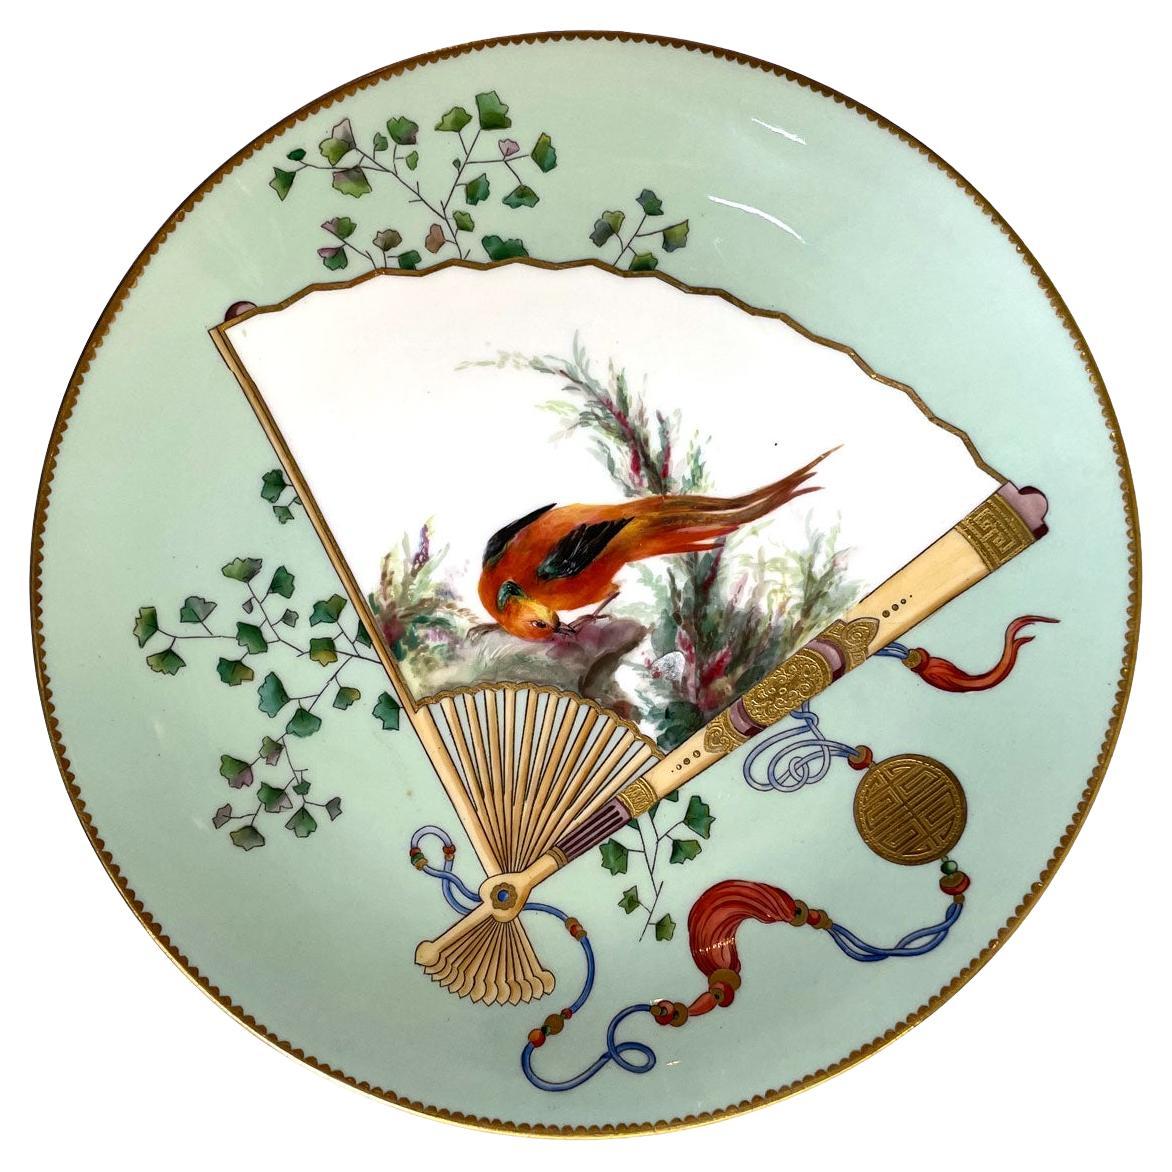 Christopher Dresser Aesthetic Movement Japonism Style Green Minton Plate, 1876